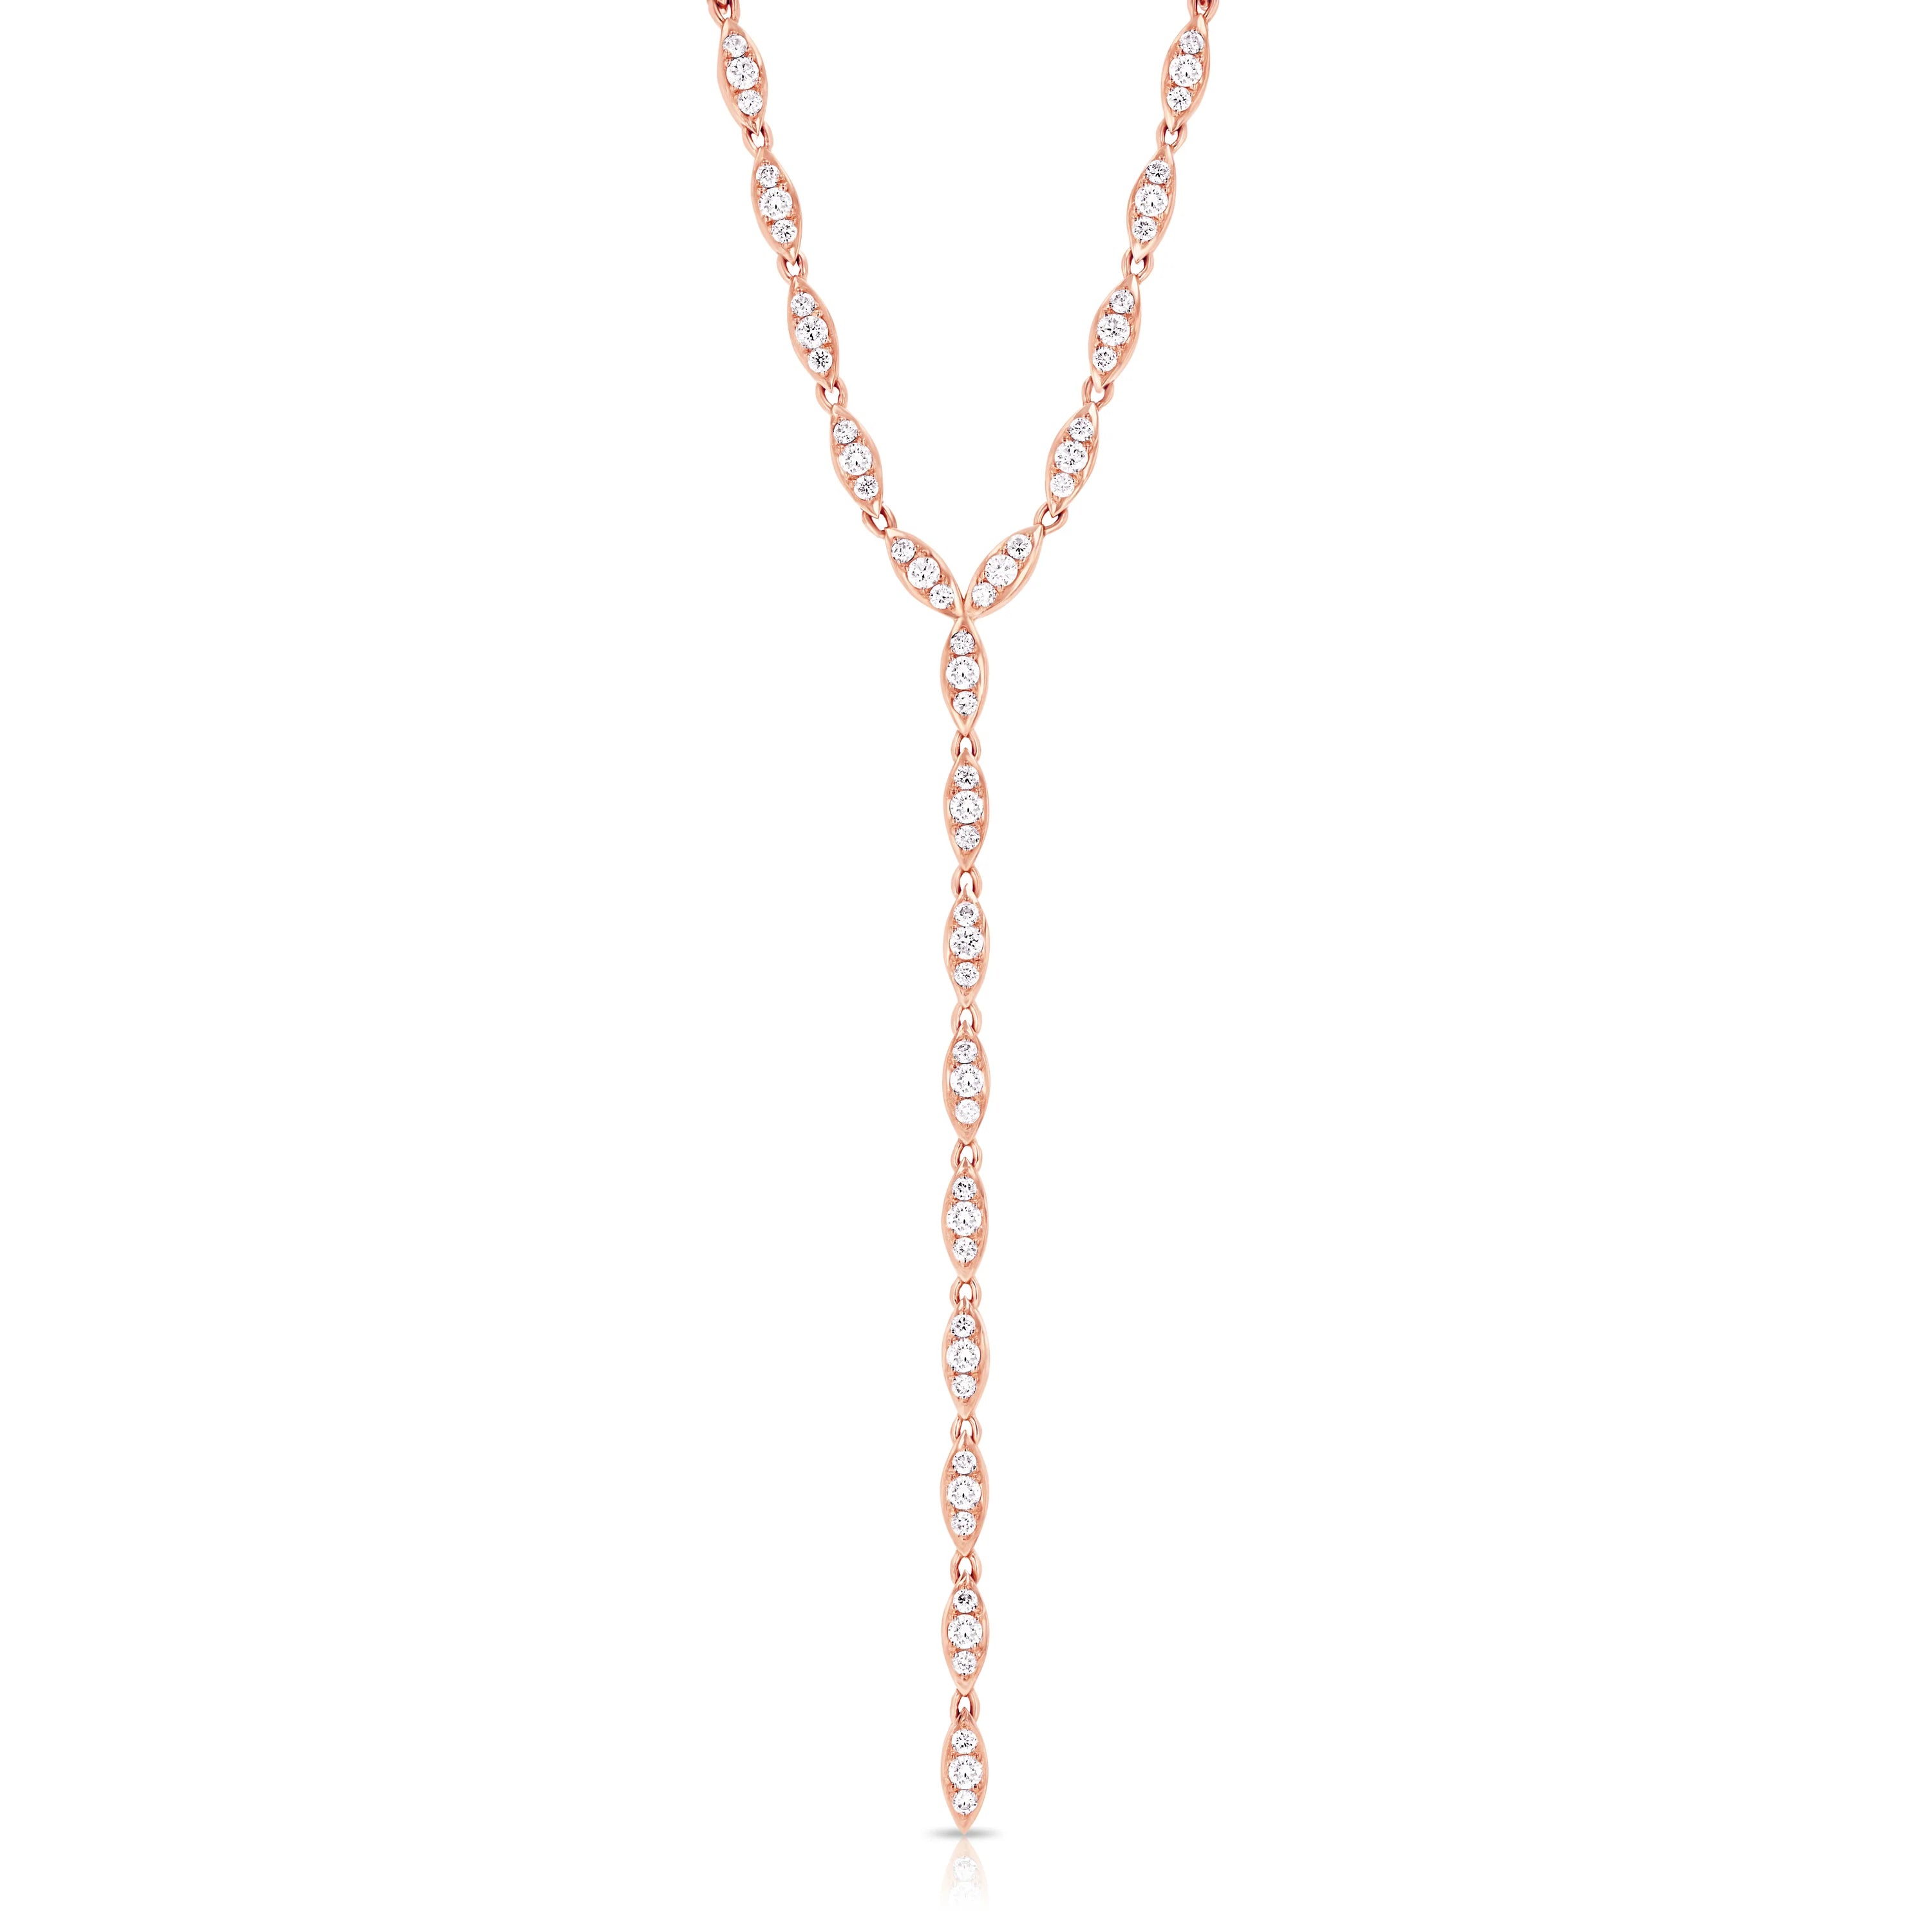 Angel Lariat Necklace Lariat Carbon and Hyde Rose Gold  